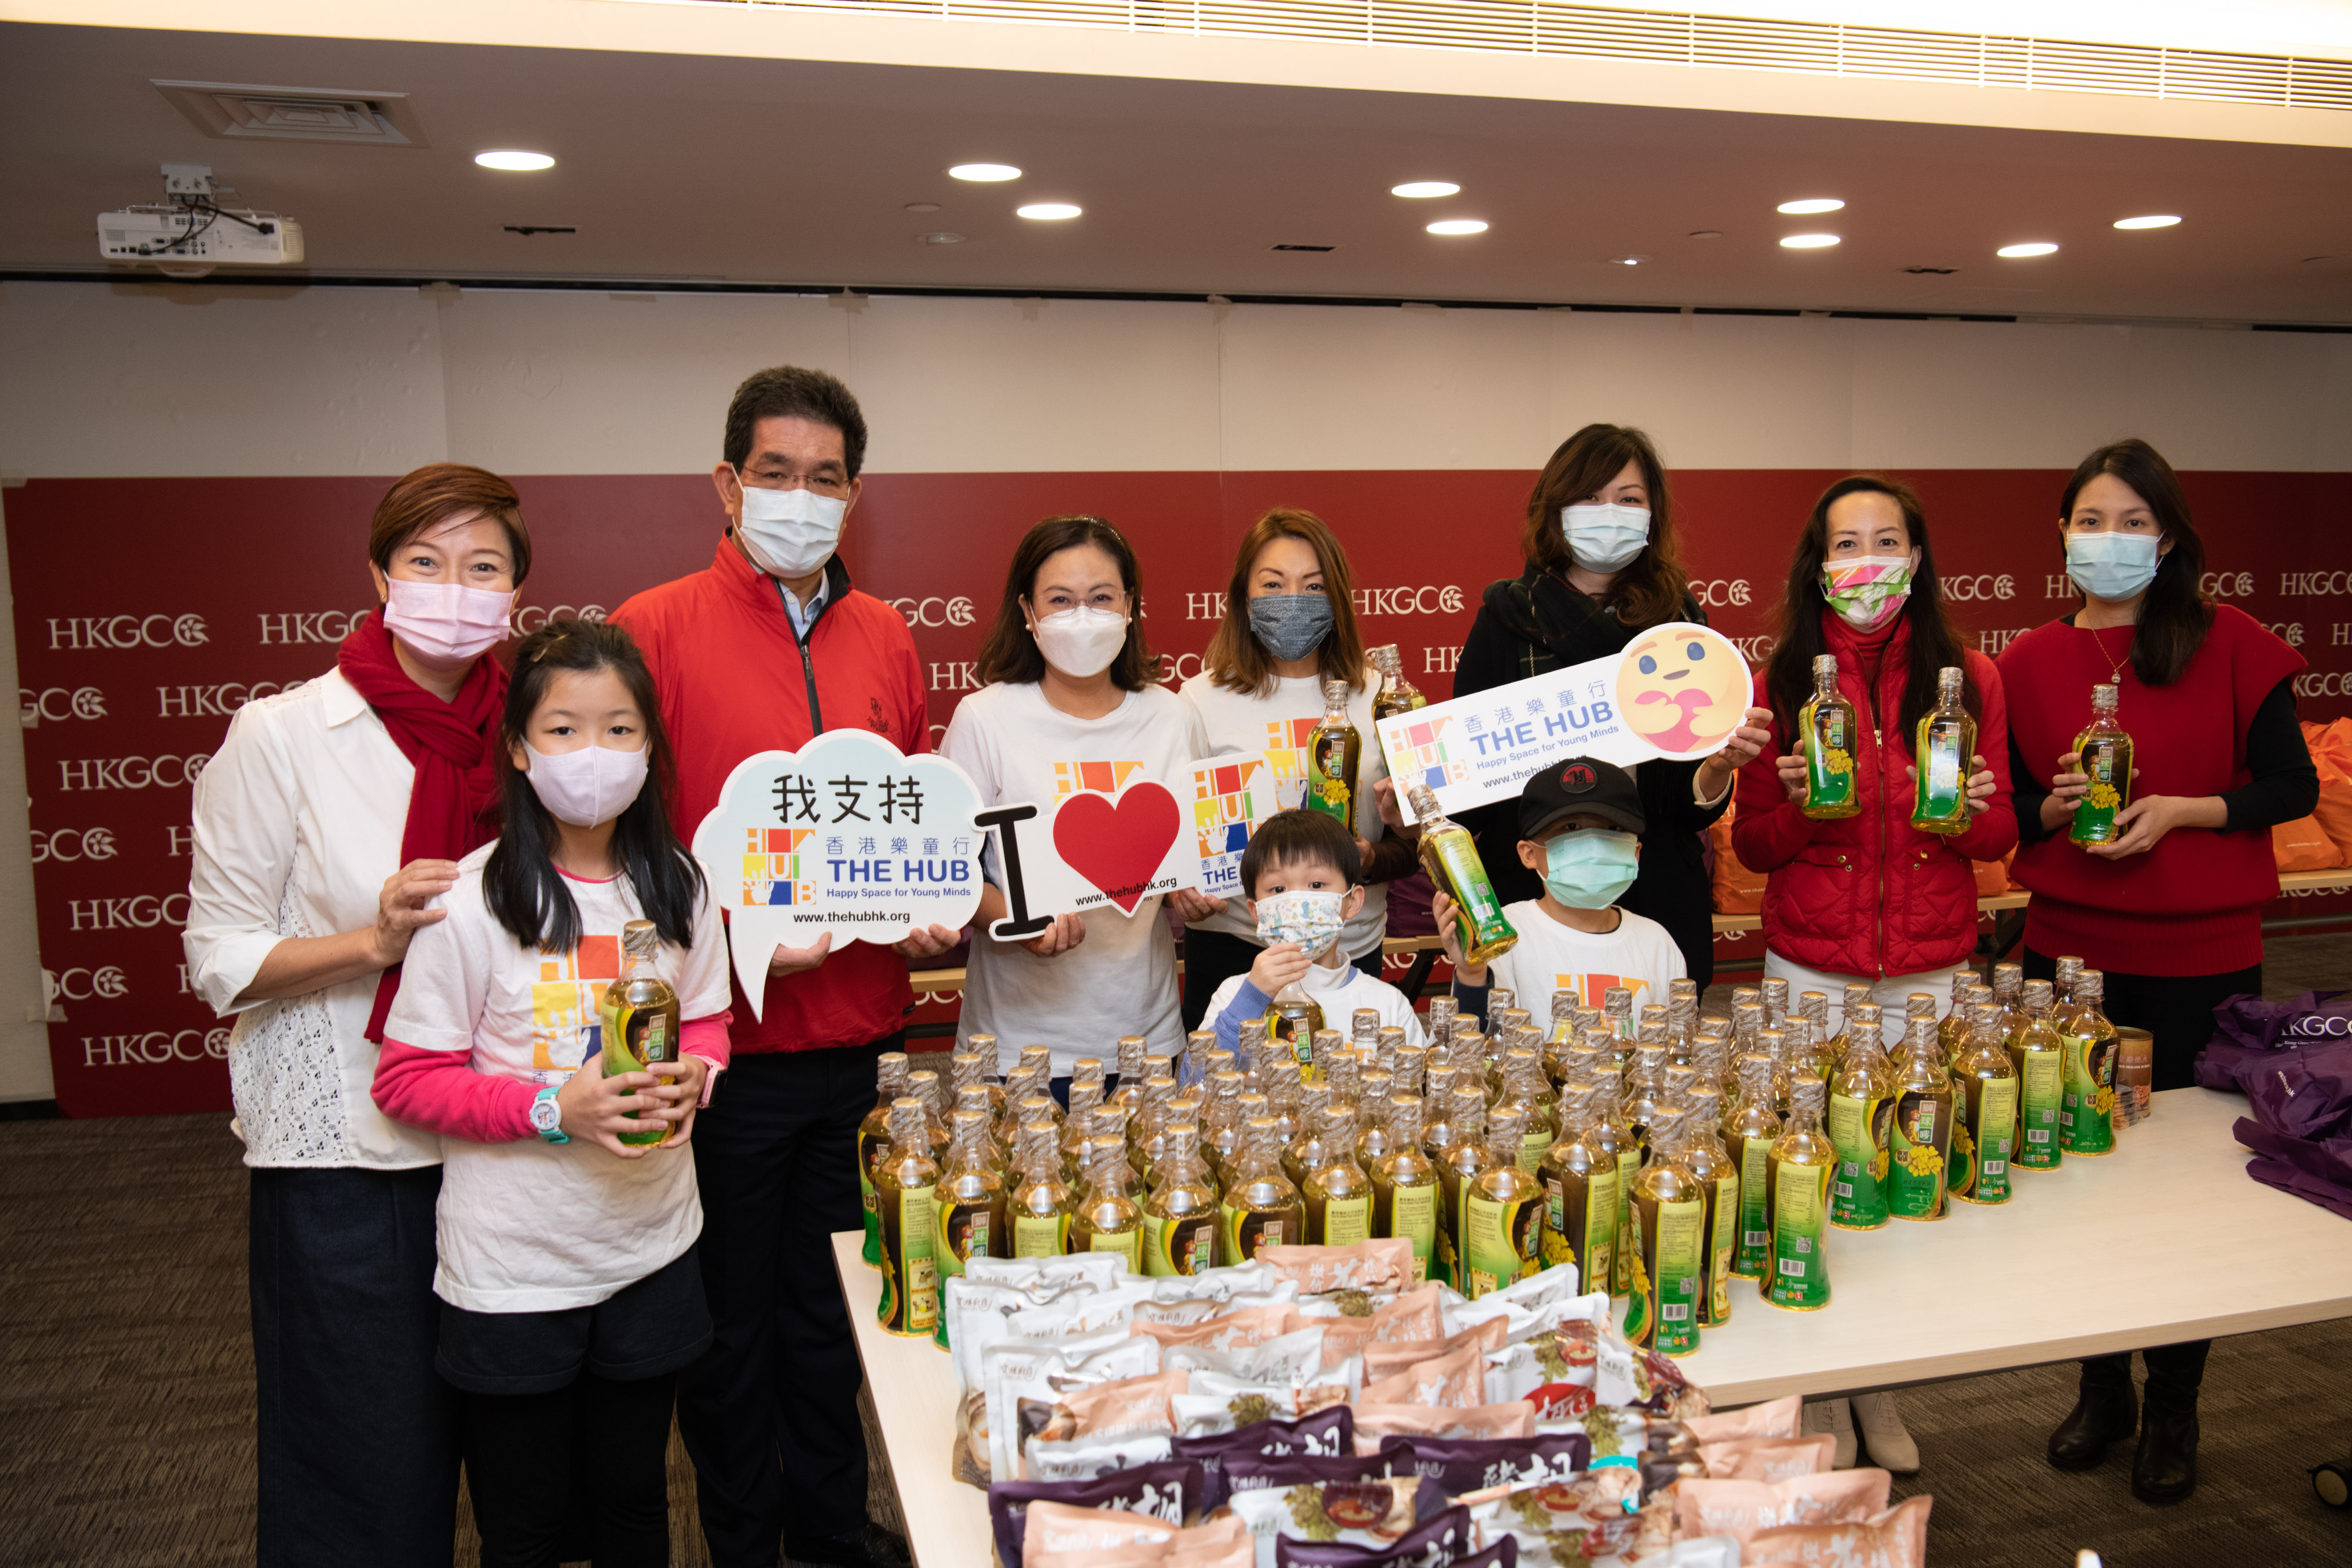 HKGCC Community Project: Care and Food Package Donation to THE HUB Shamshuipo